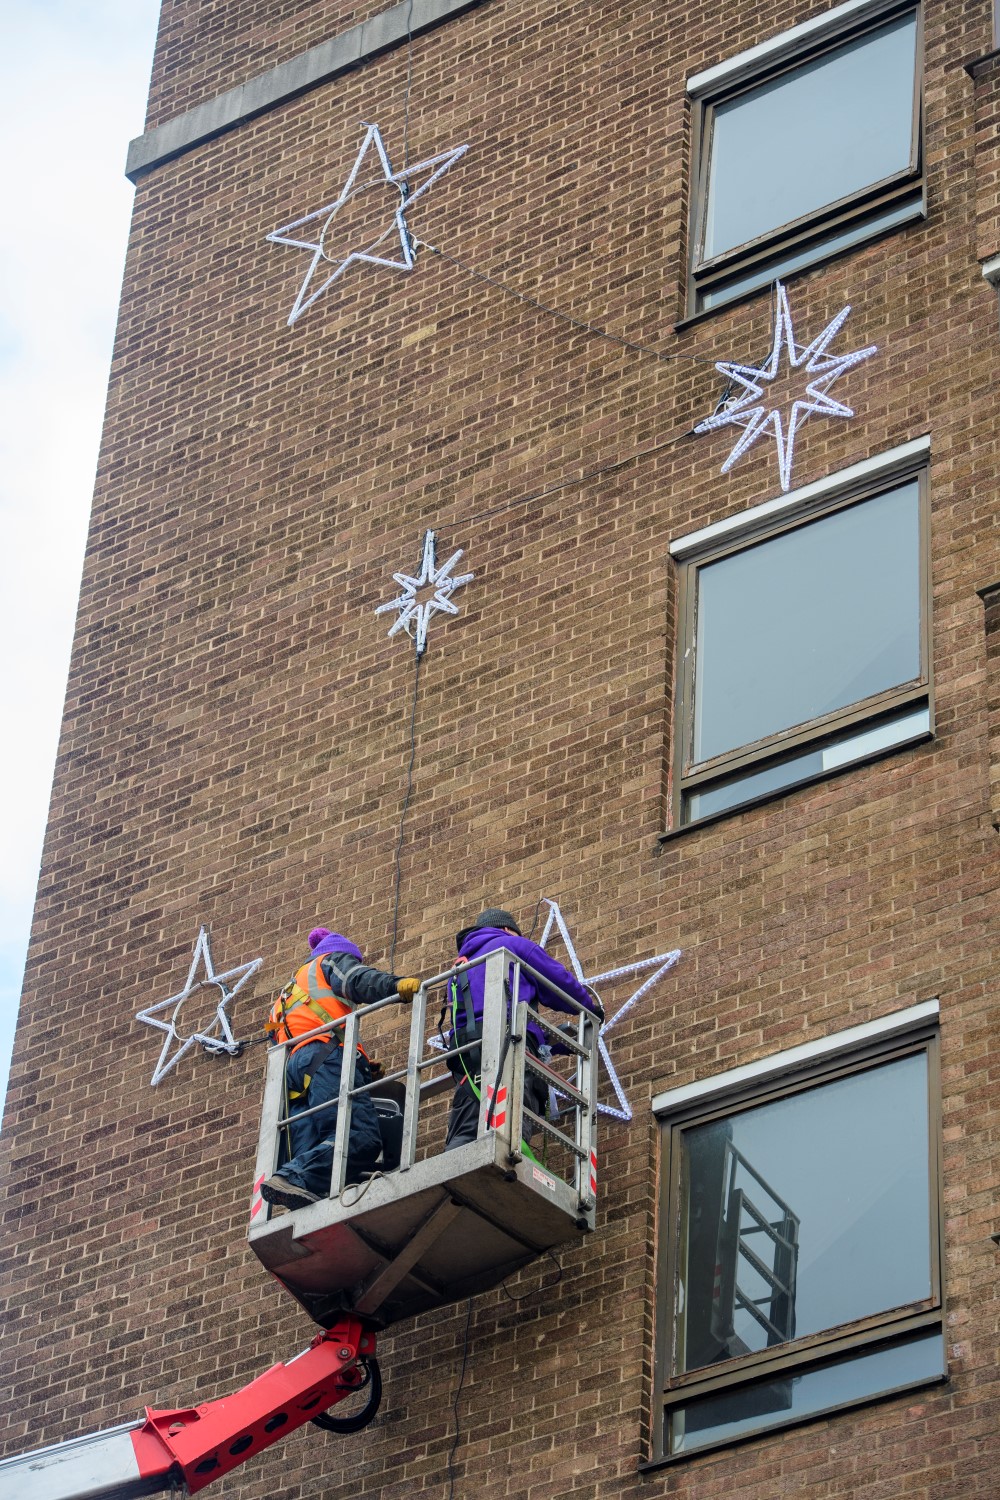 Light-up blue star motifs displayed outside County Hospital designed by Fizzco Projects.